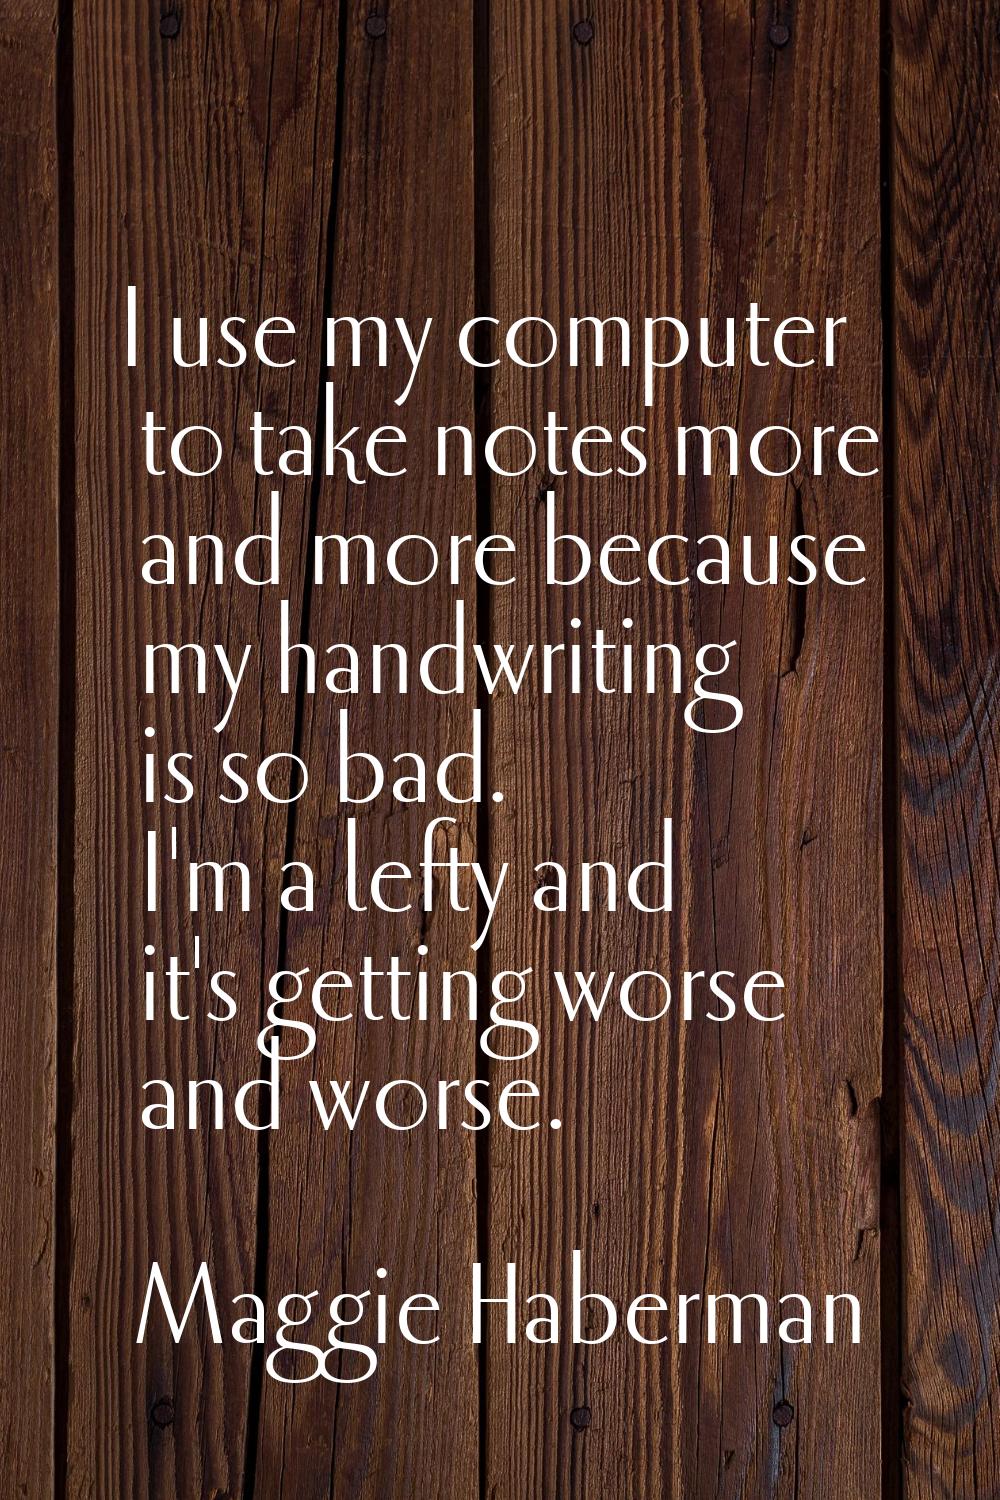 I use my computer to take notes more and more because my handwriting is so bad. I'm a lefty and it'